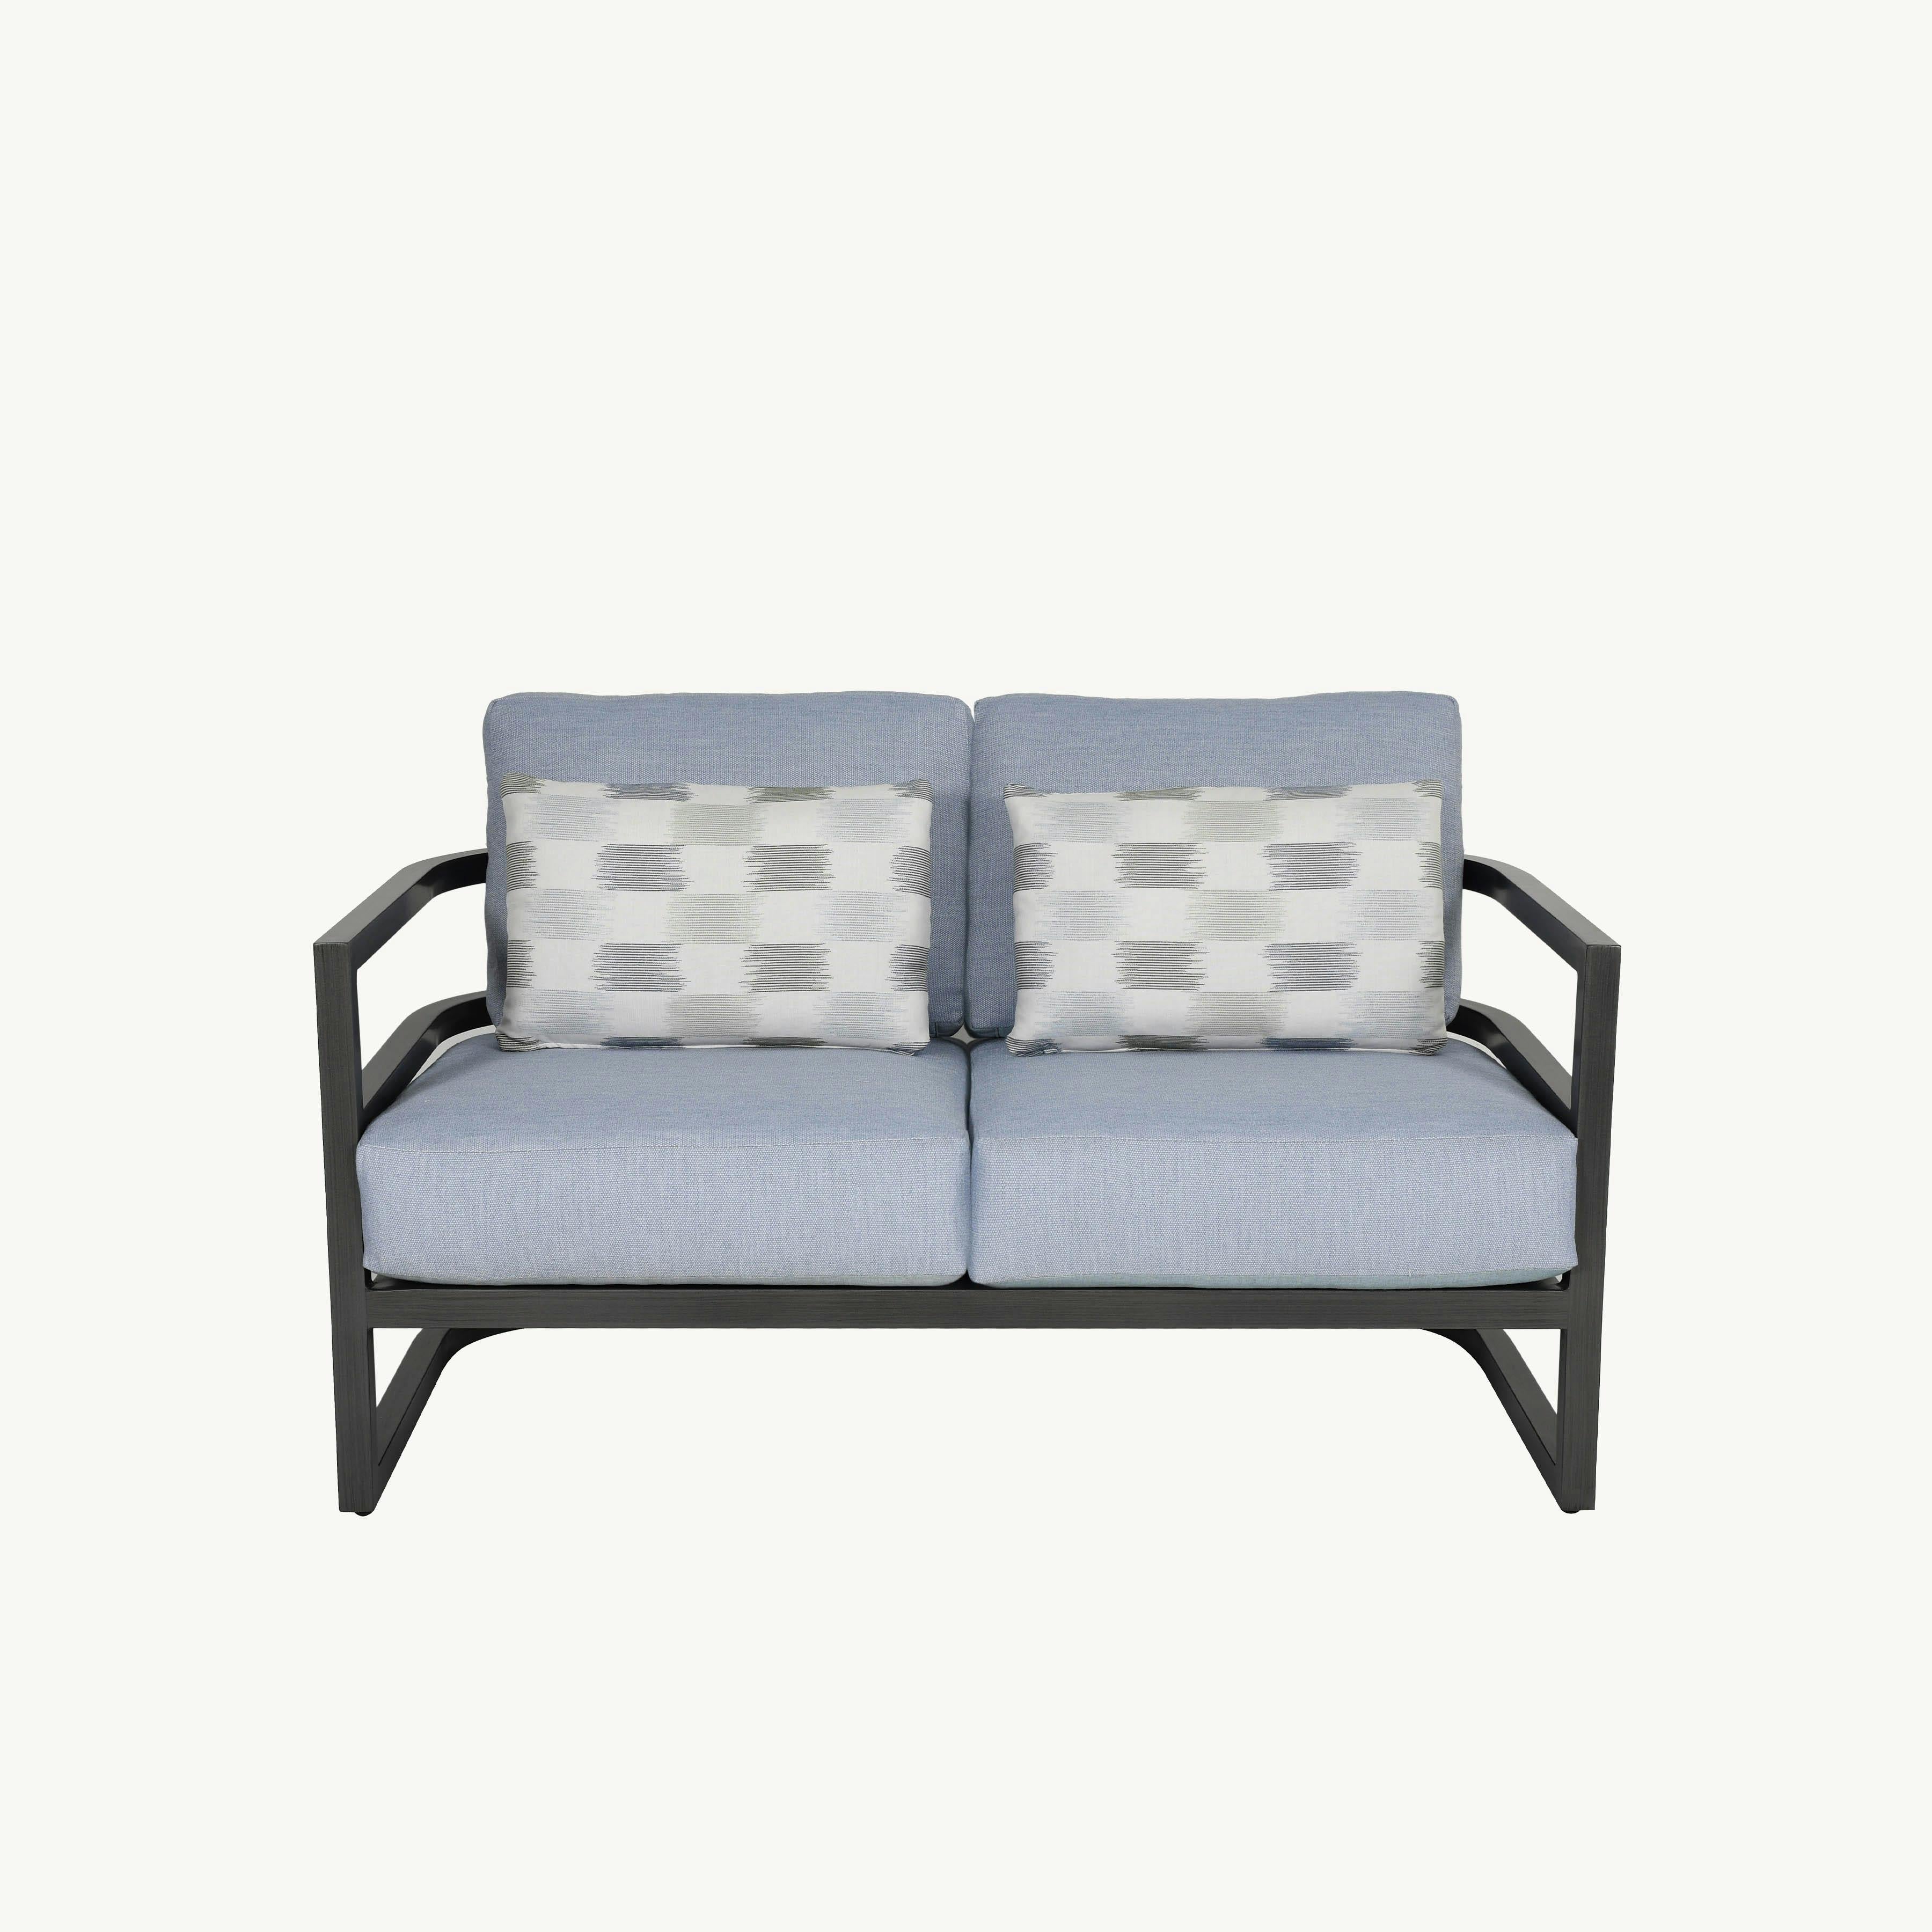 Gala Cushioned Loveseat By Castelle